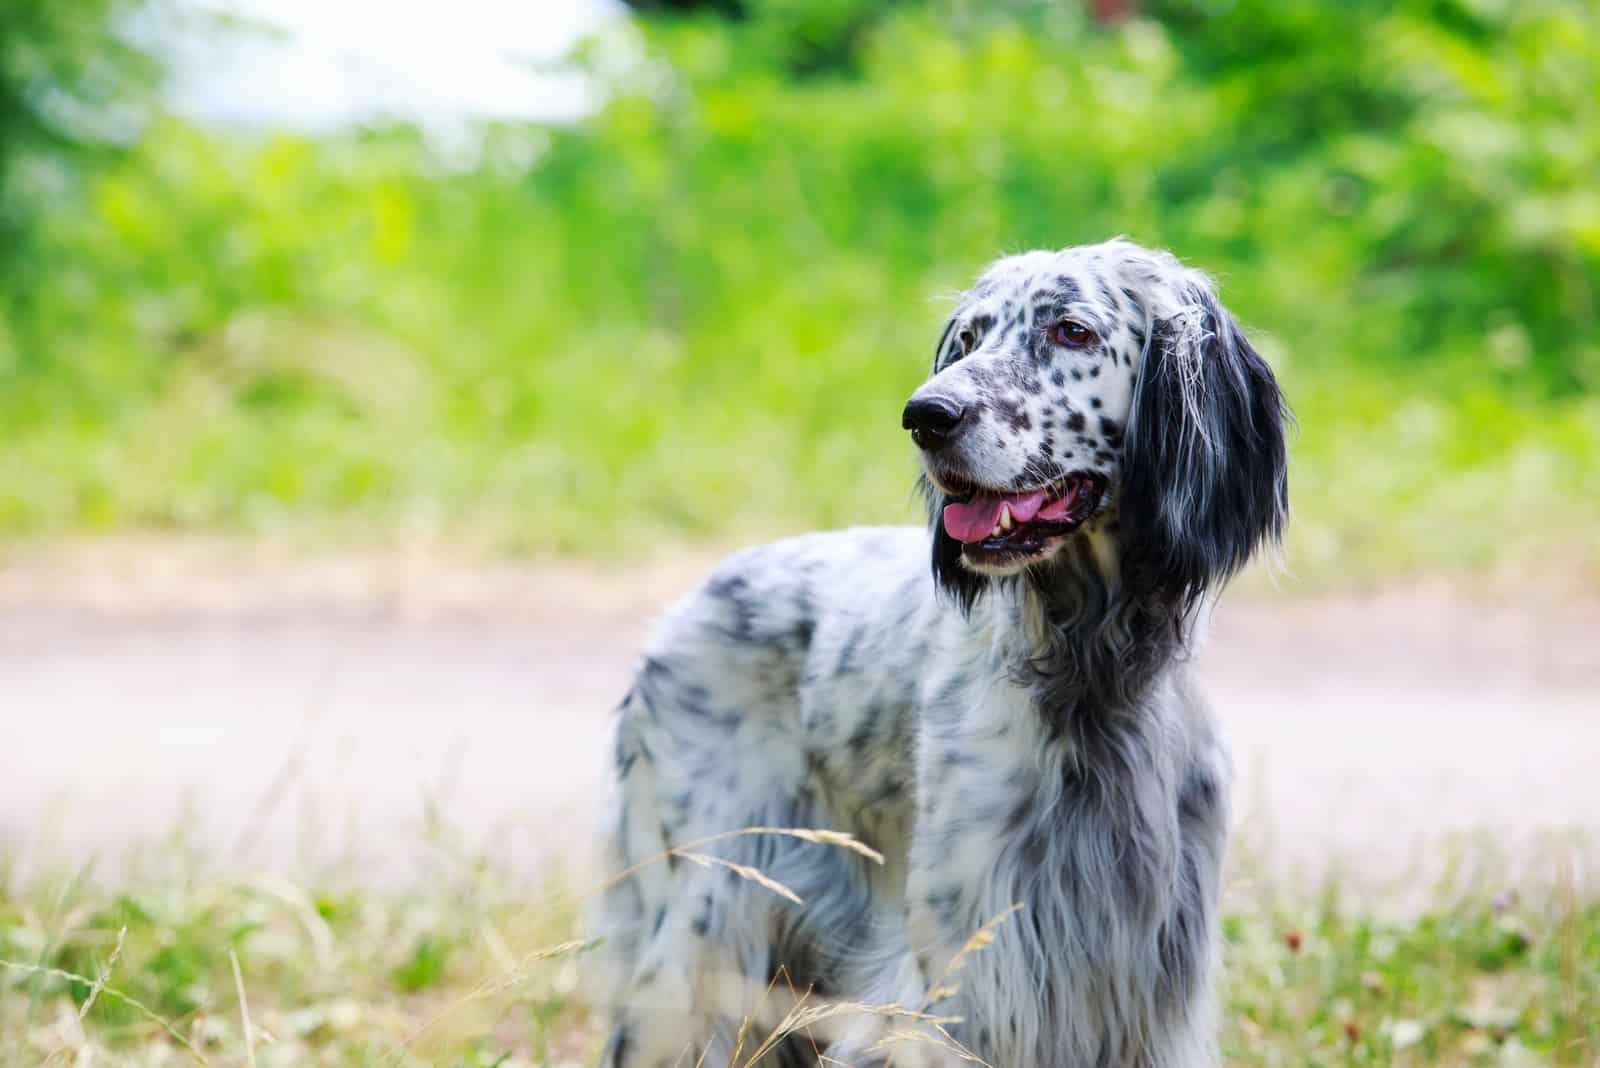 English Setter standing in grass